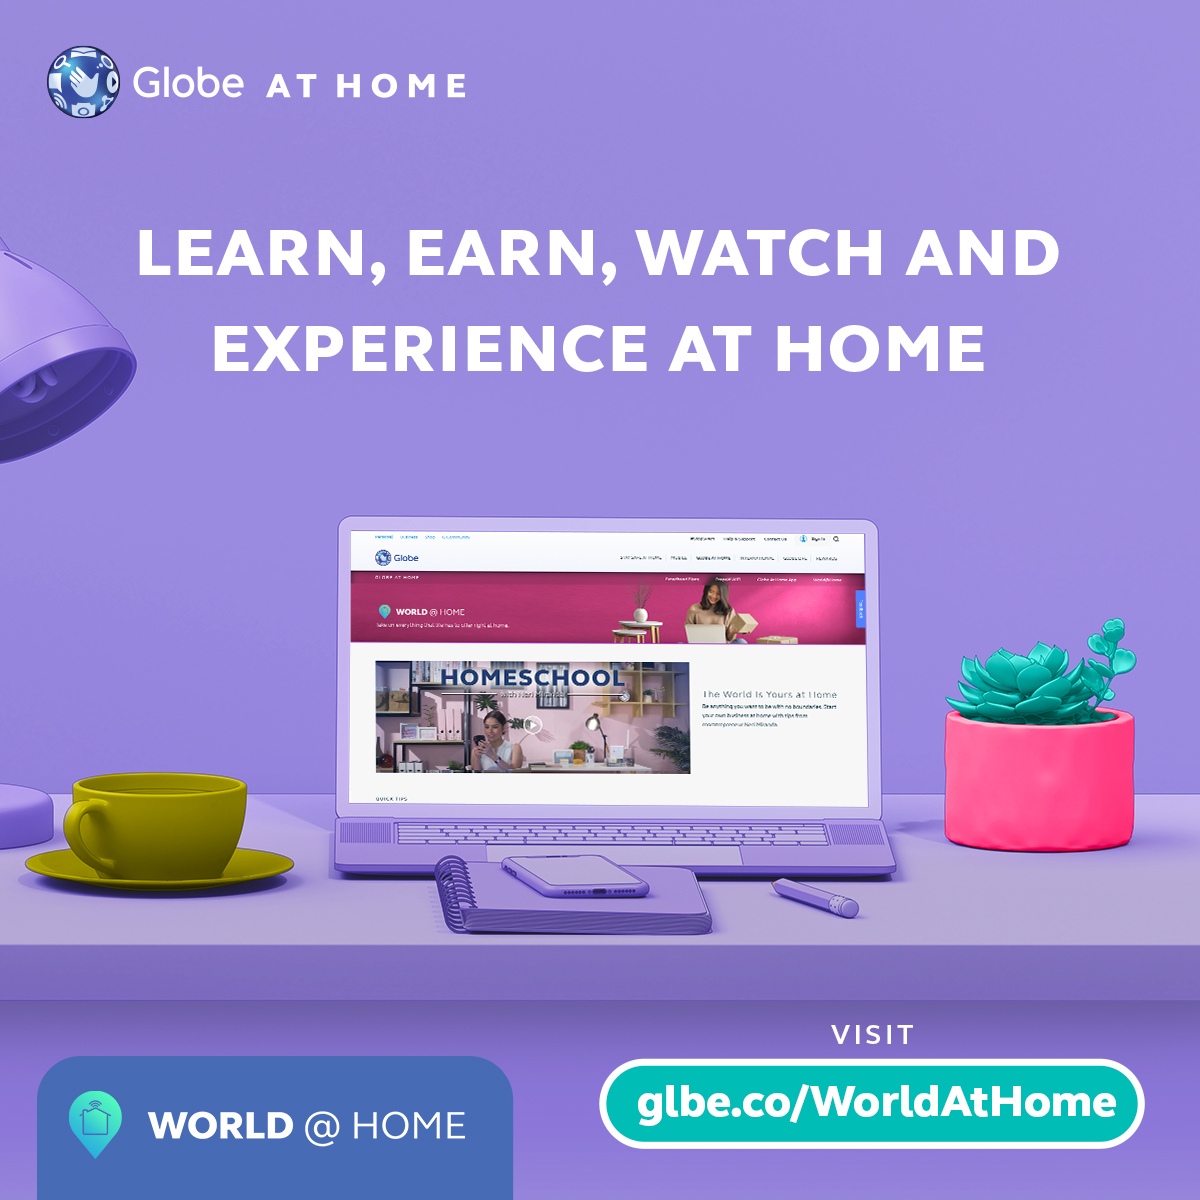 Experience it all with affordable plans from Globe at Home